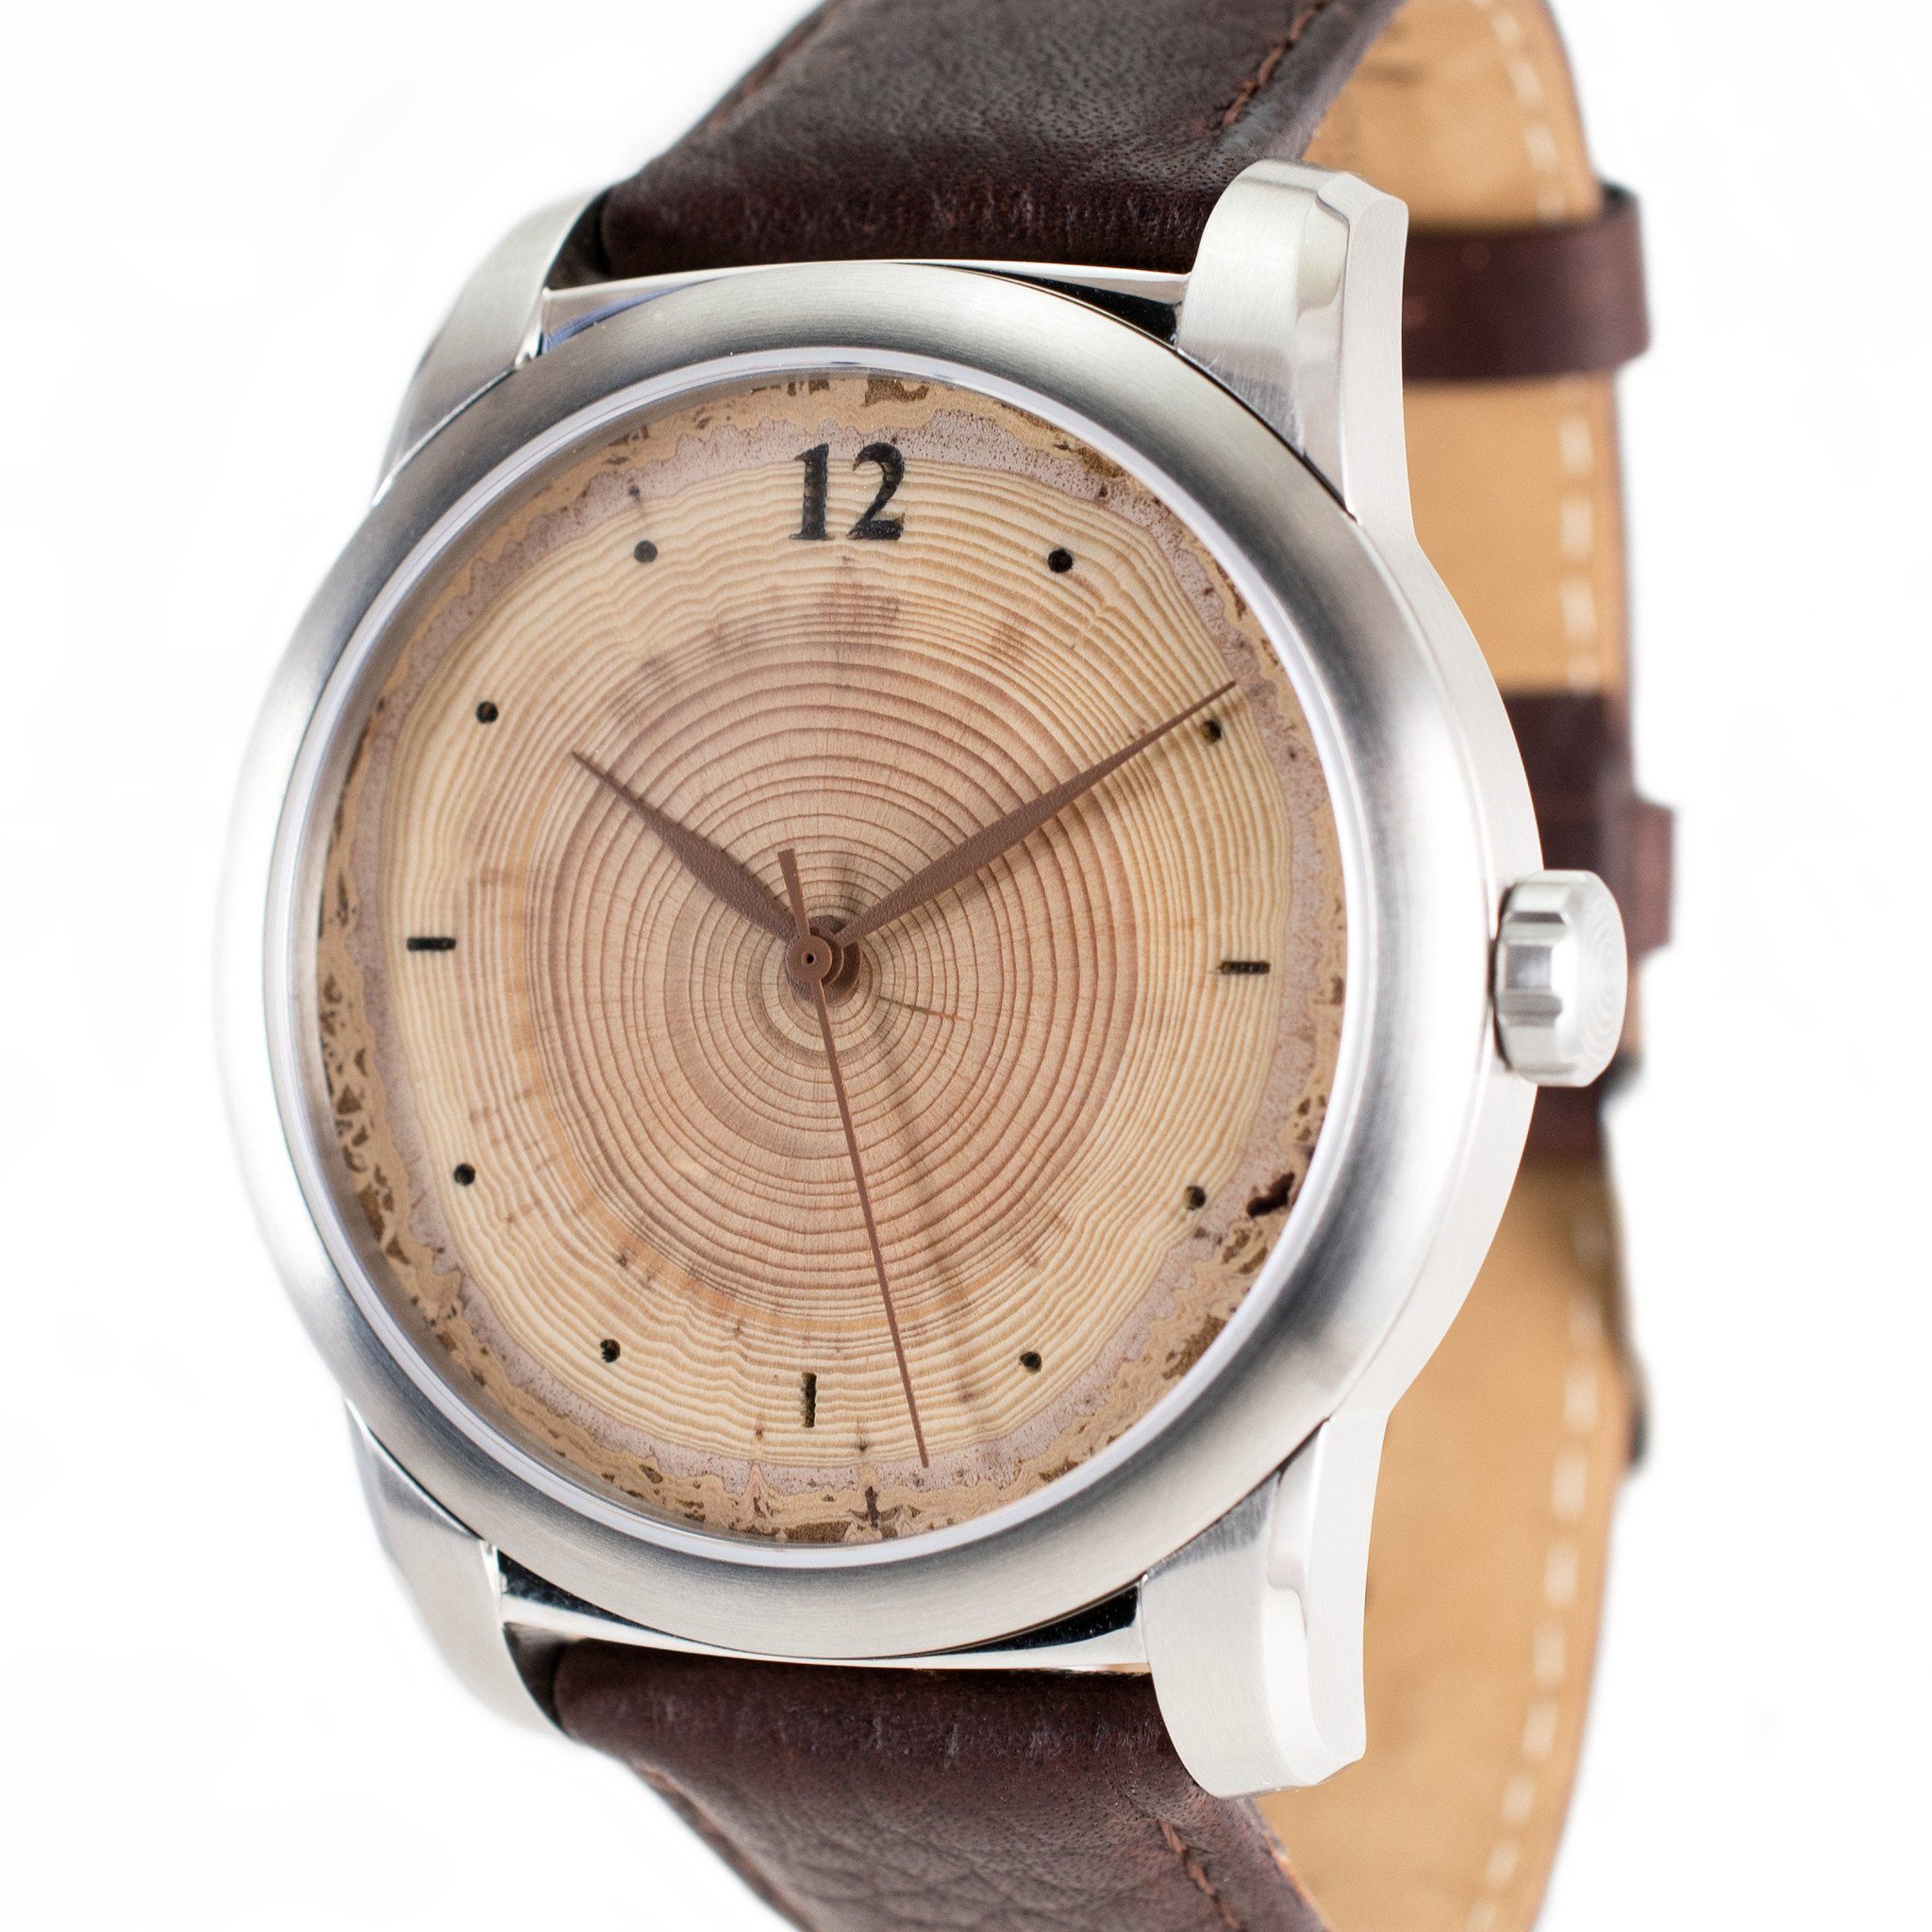 The Classic Men's Wood Watch (43 mm) - Tree Ring Co